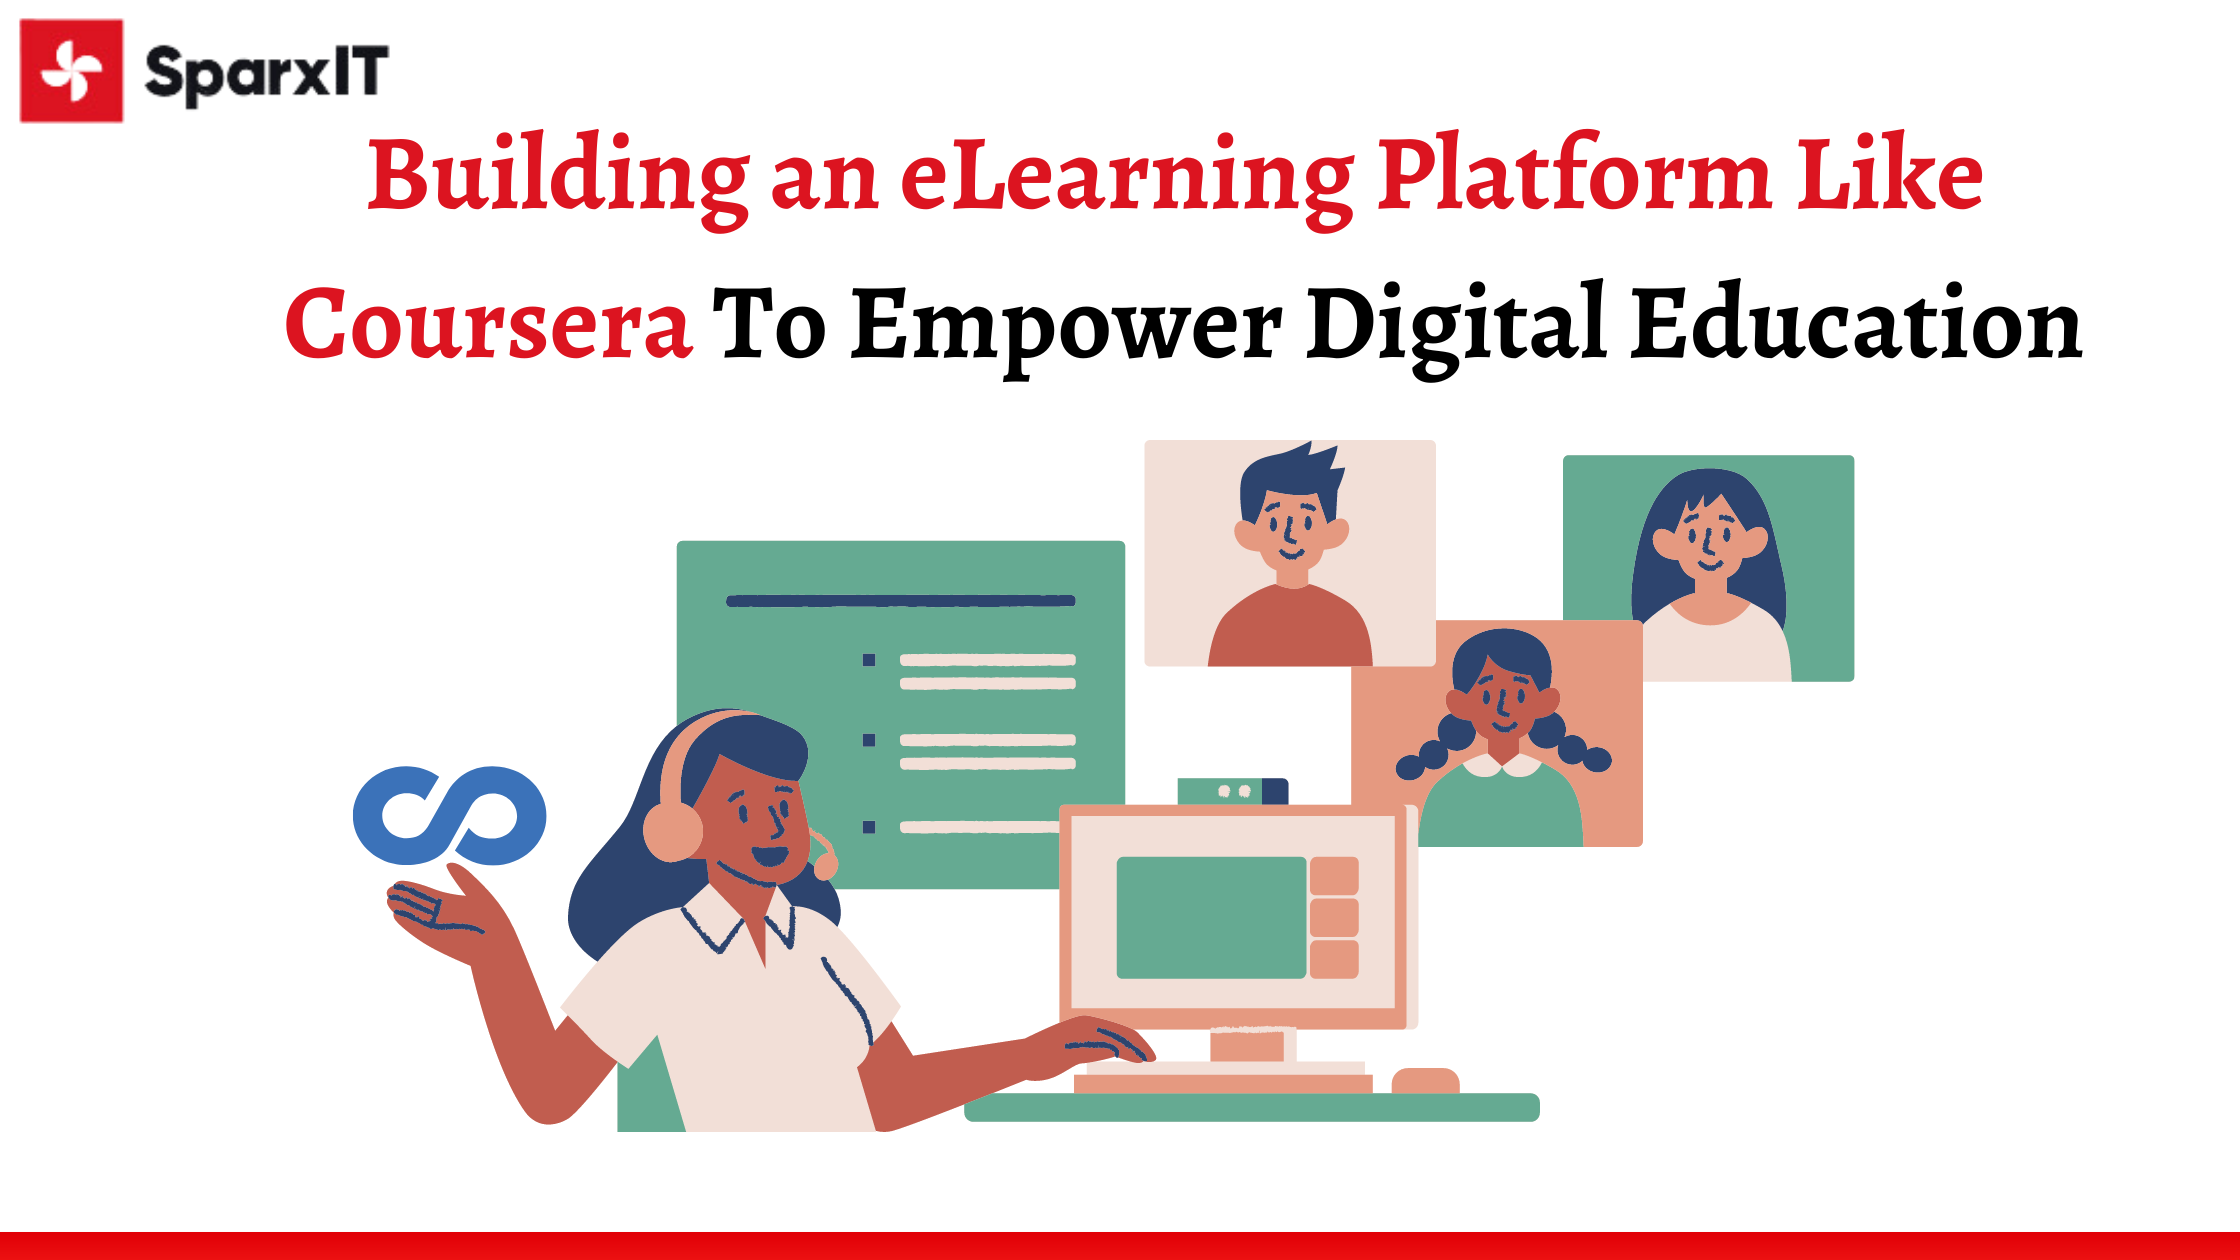 Building an eLearning Platform Like Coursera To Empower Digital Education